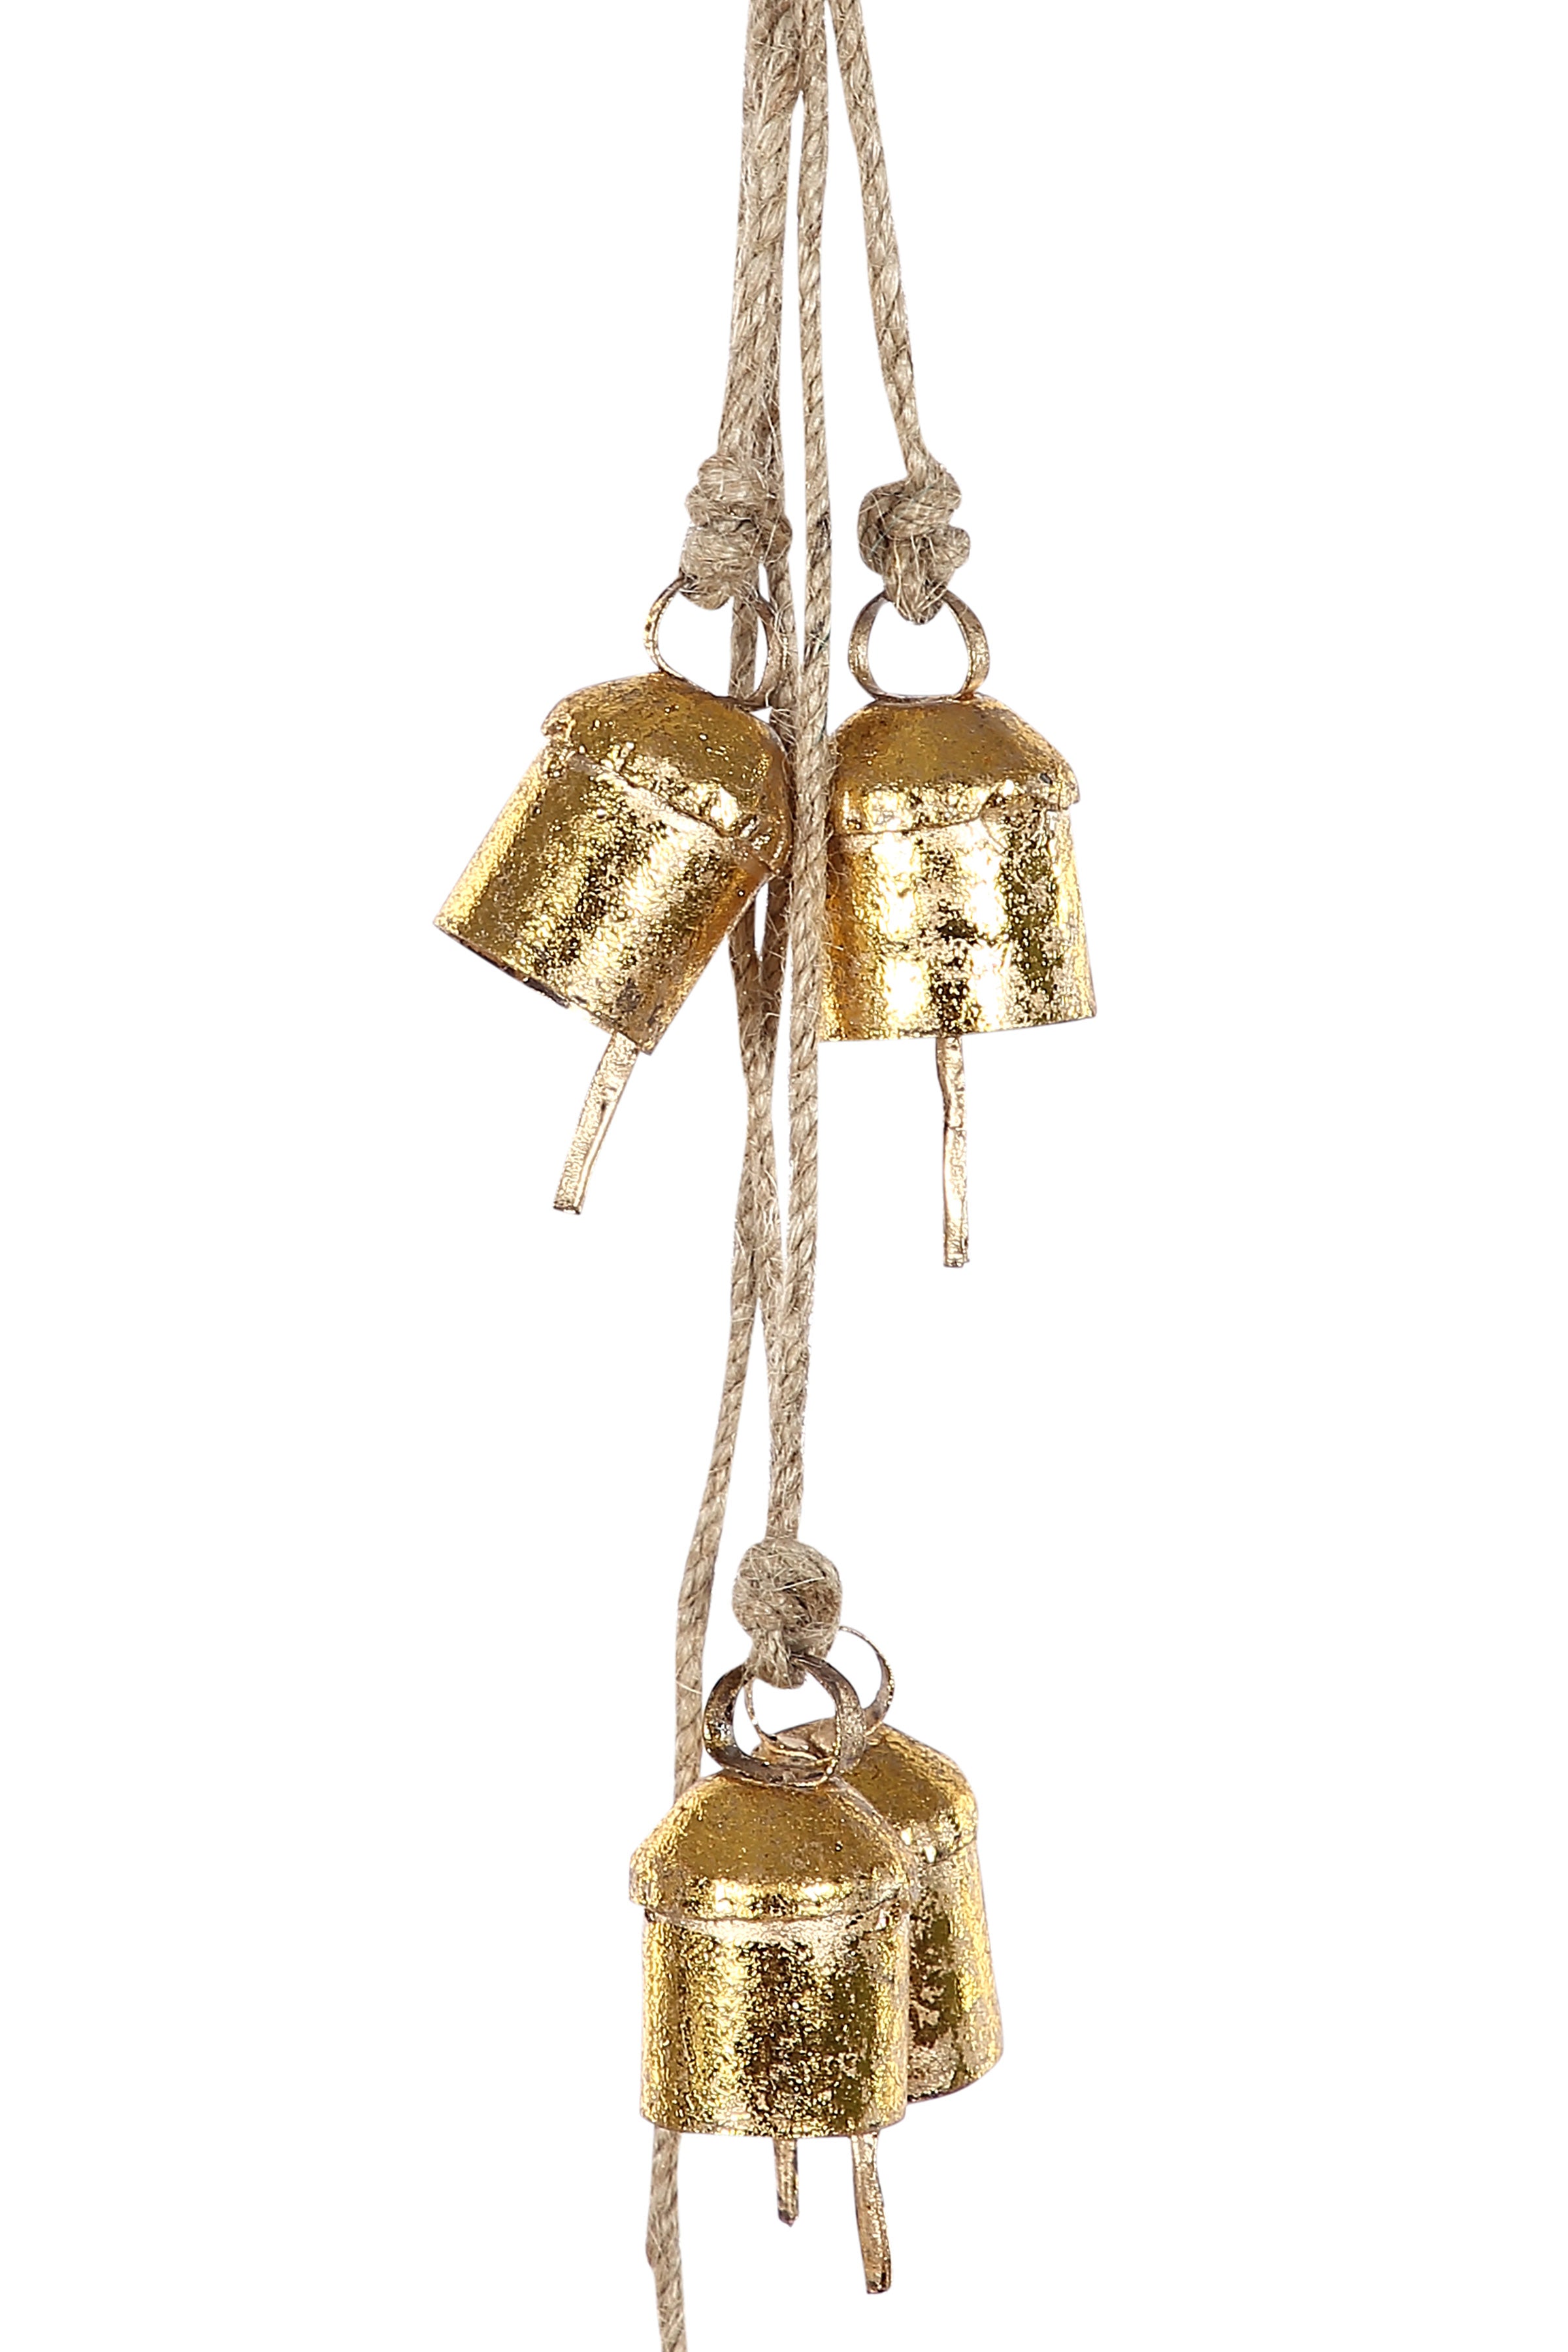 China Factory Iron Bell Wind Chimes, Witch Bells for Door Knob, Pet  Training Bells, with Jute Cord 270mm in bulk online 